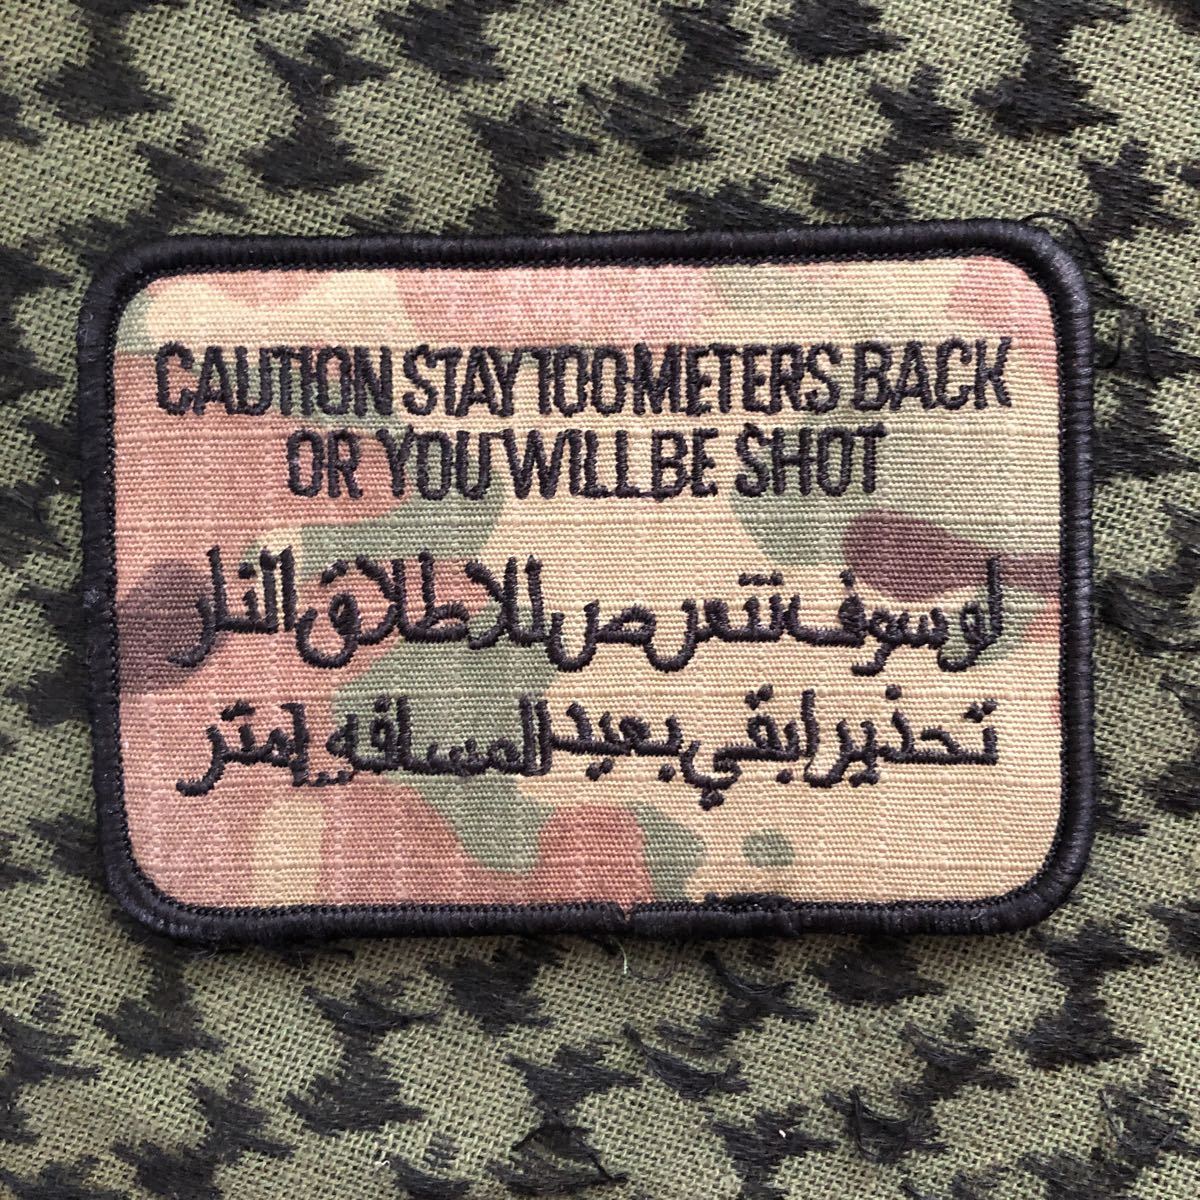 CAUTION STAY 100 METERS BACK OR YOU WILL BE SHOT 刺繍パッチ ベルクロ ワッペン サバゲー　ワッペン　ベルクロ　サバゲー　_画像1